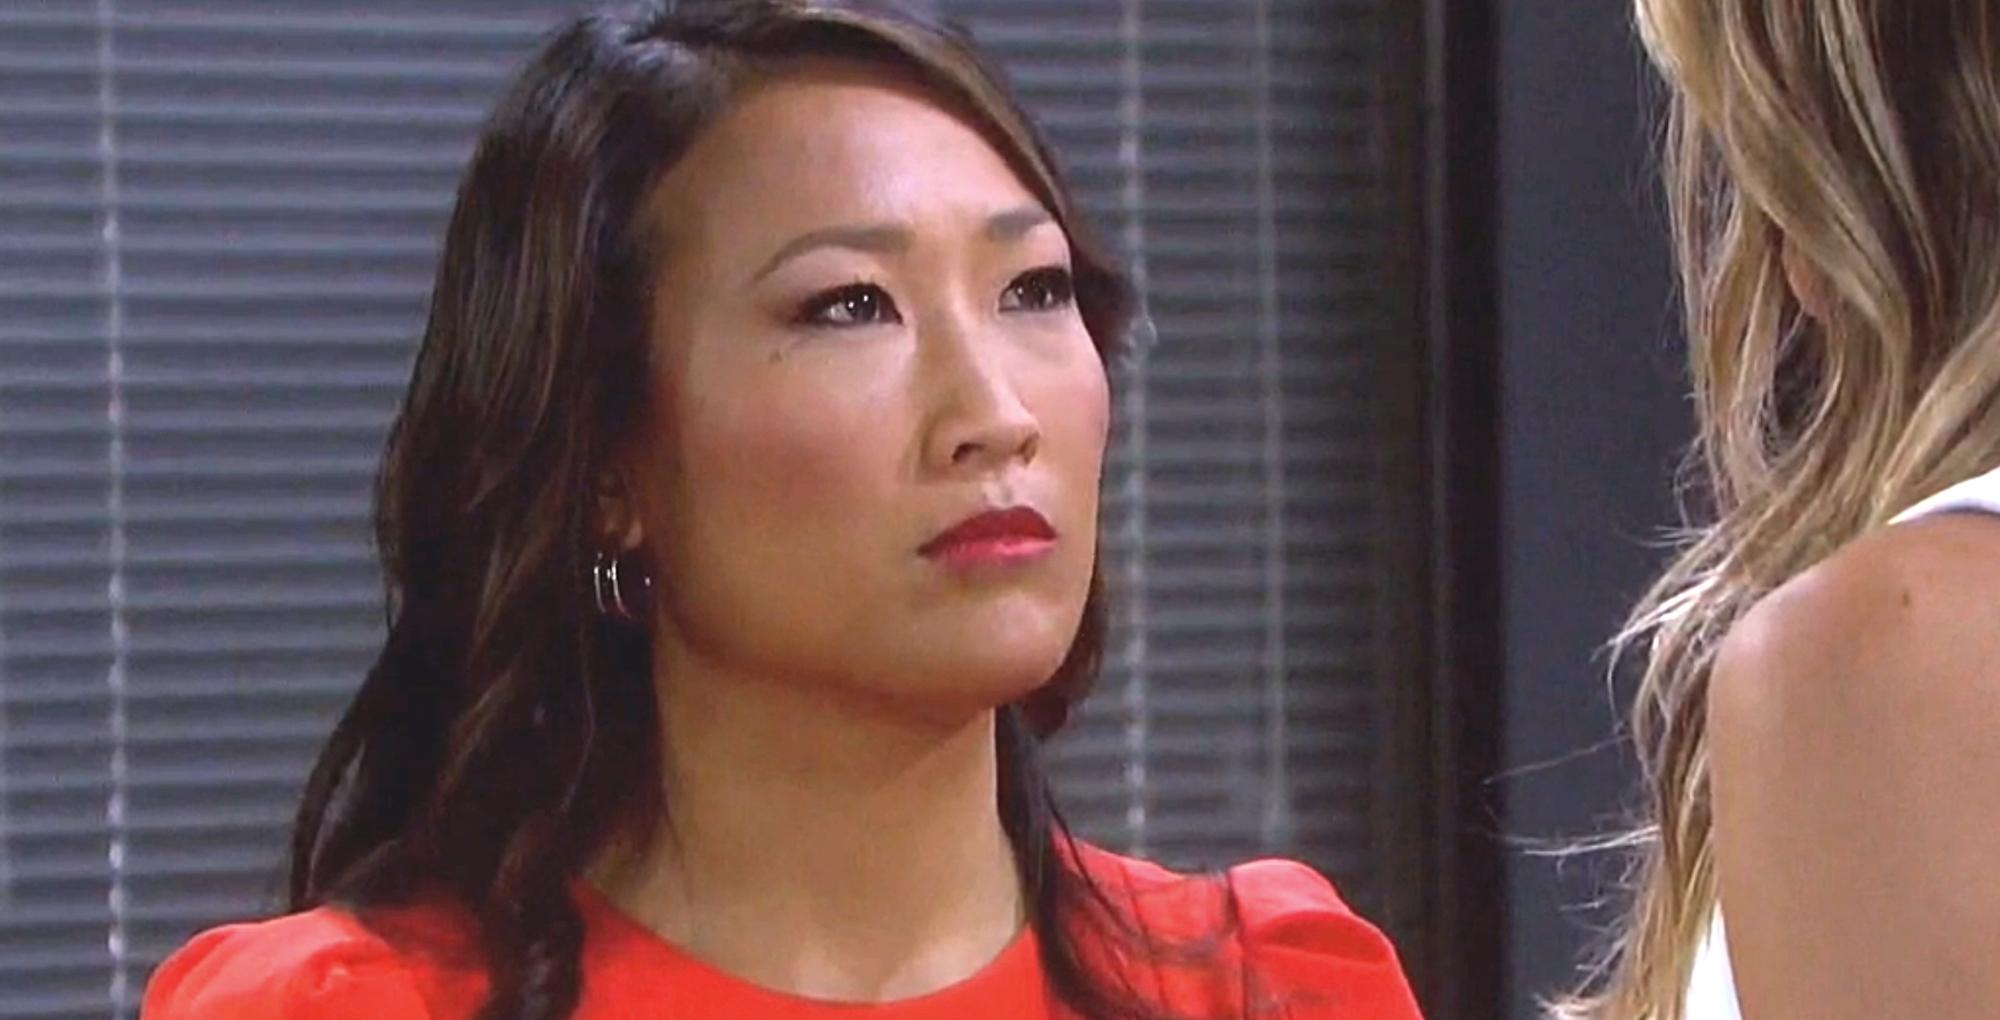 Days of our Lives Spoilers: Melinda Goes Ballistic On Sloan